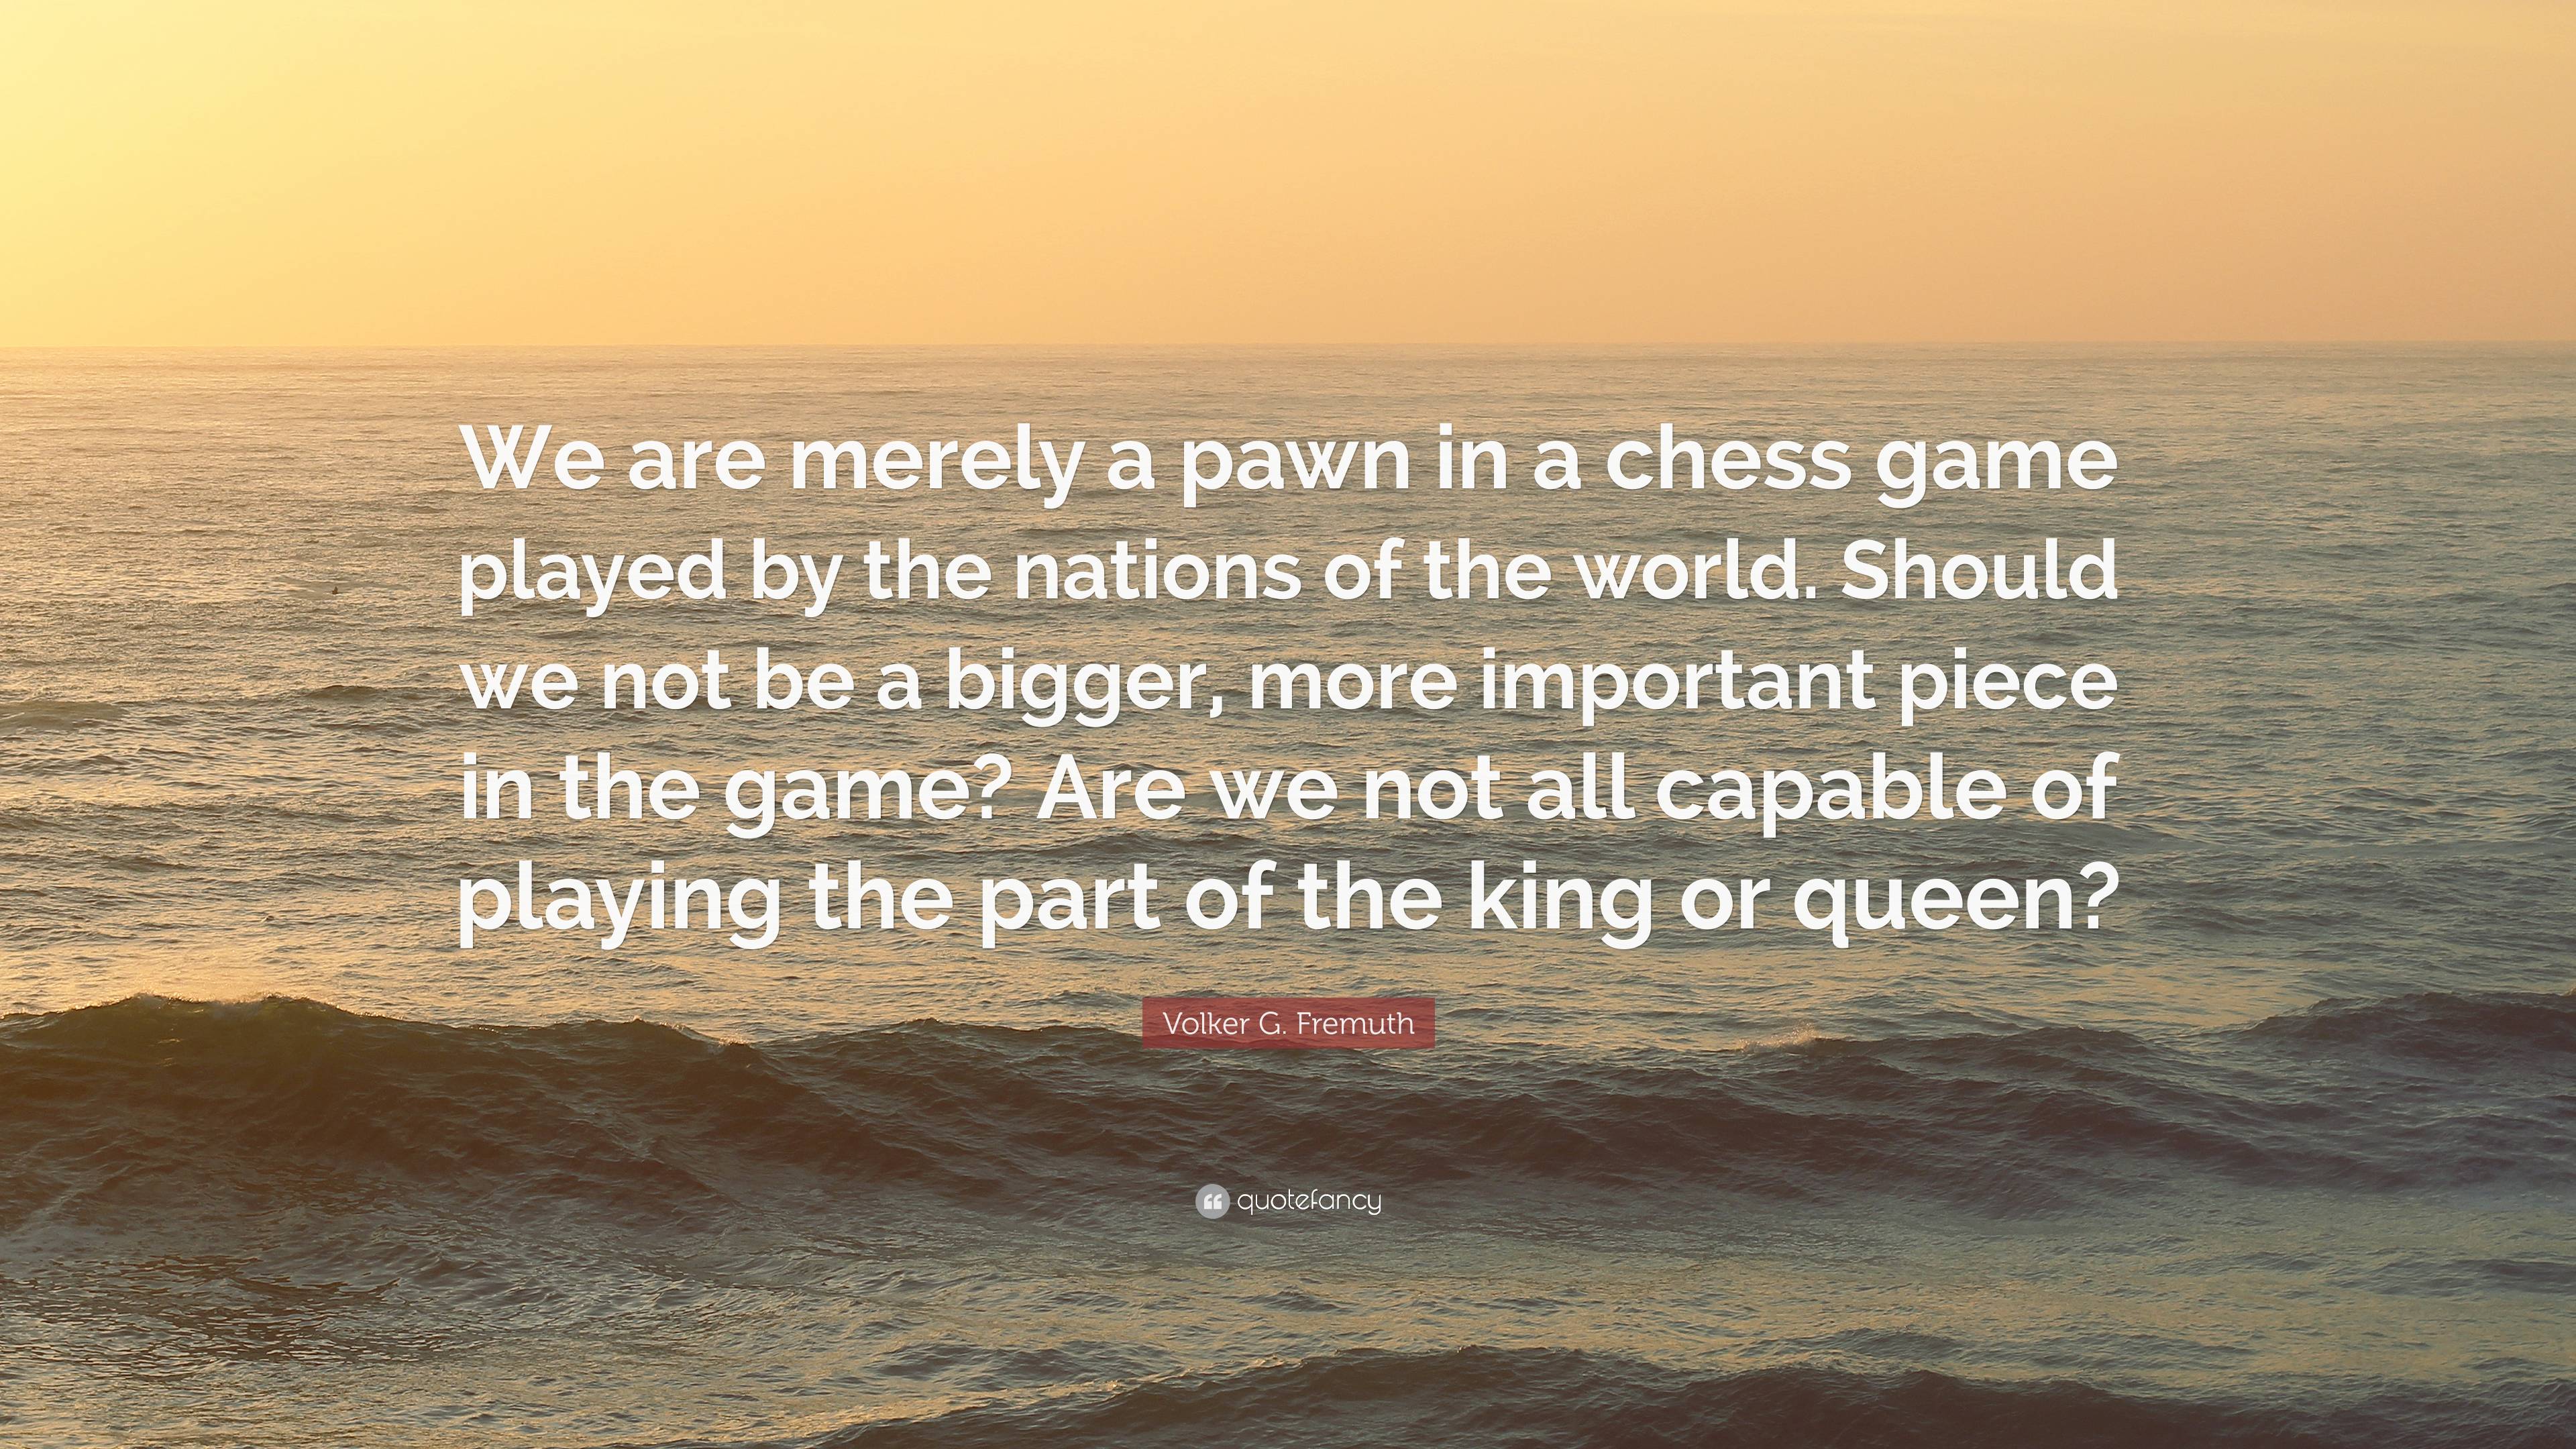 What song is this 'life is like chess except it ain't a game some pawns  remain pawns some pawns become kings'? - Quora